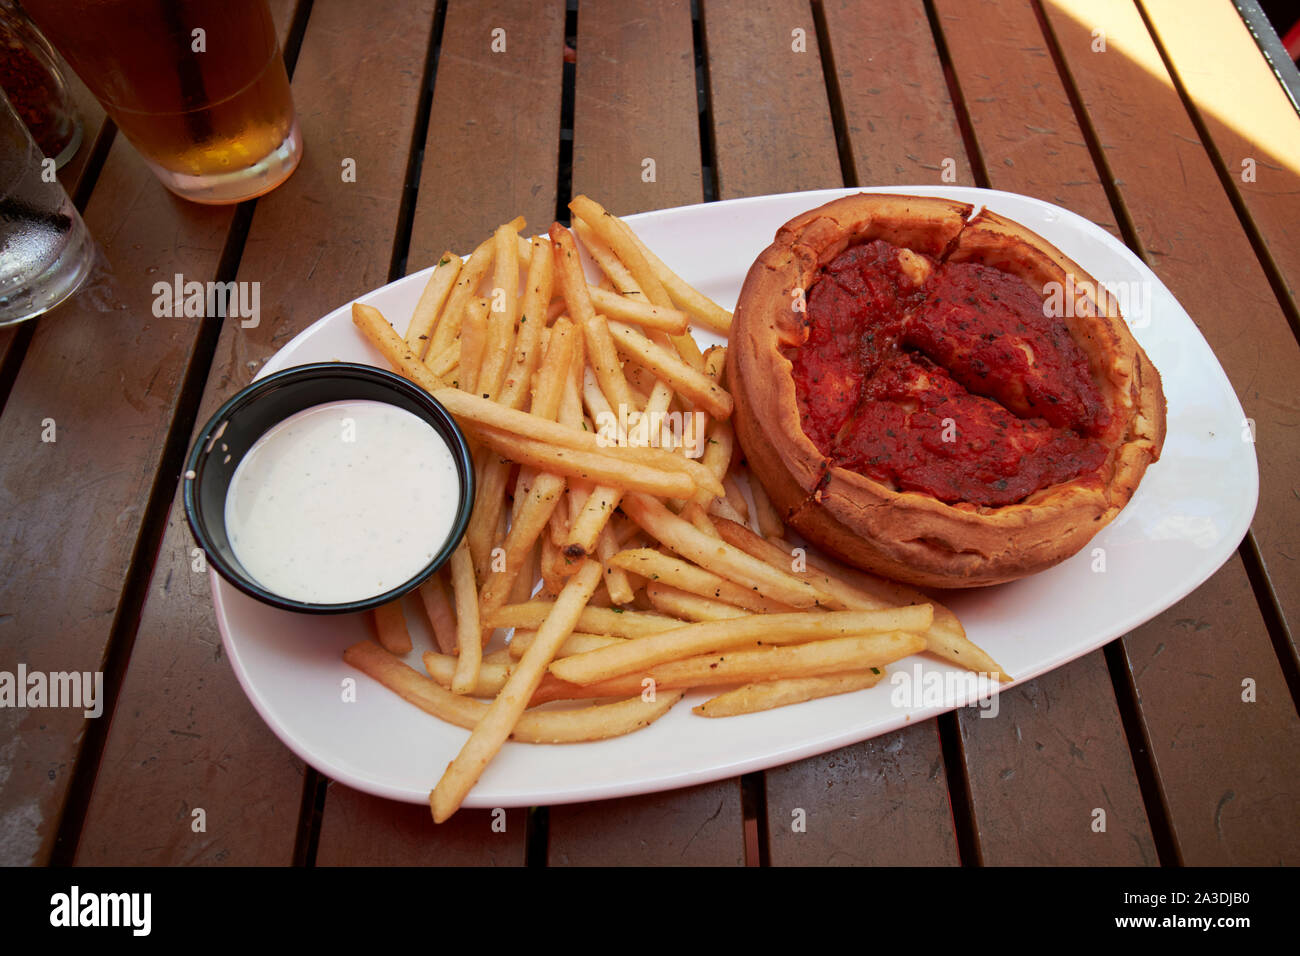 chicago-style deep dish pizza meal with fries and dip from giordanos chicago illinois united states of america Stock Photo